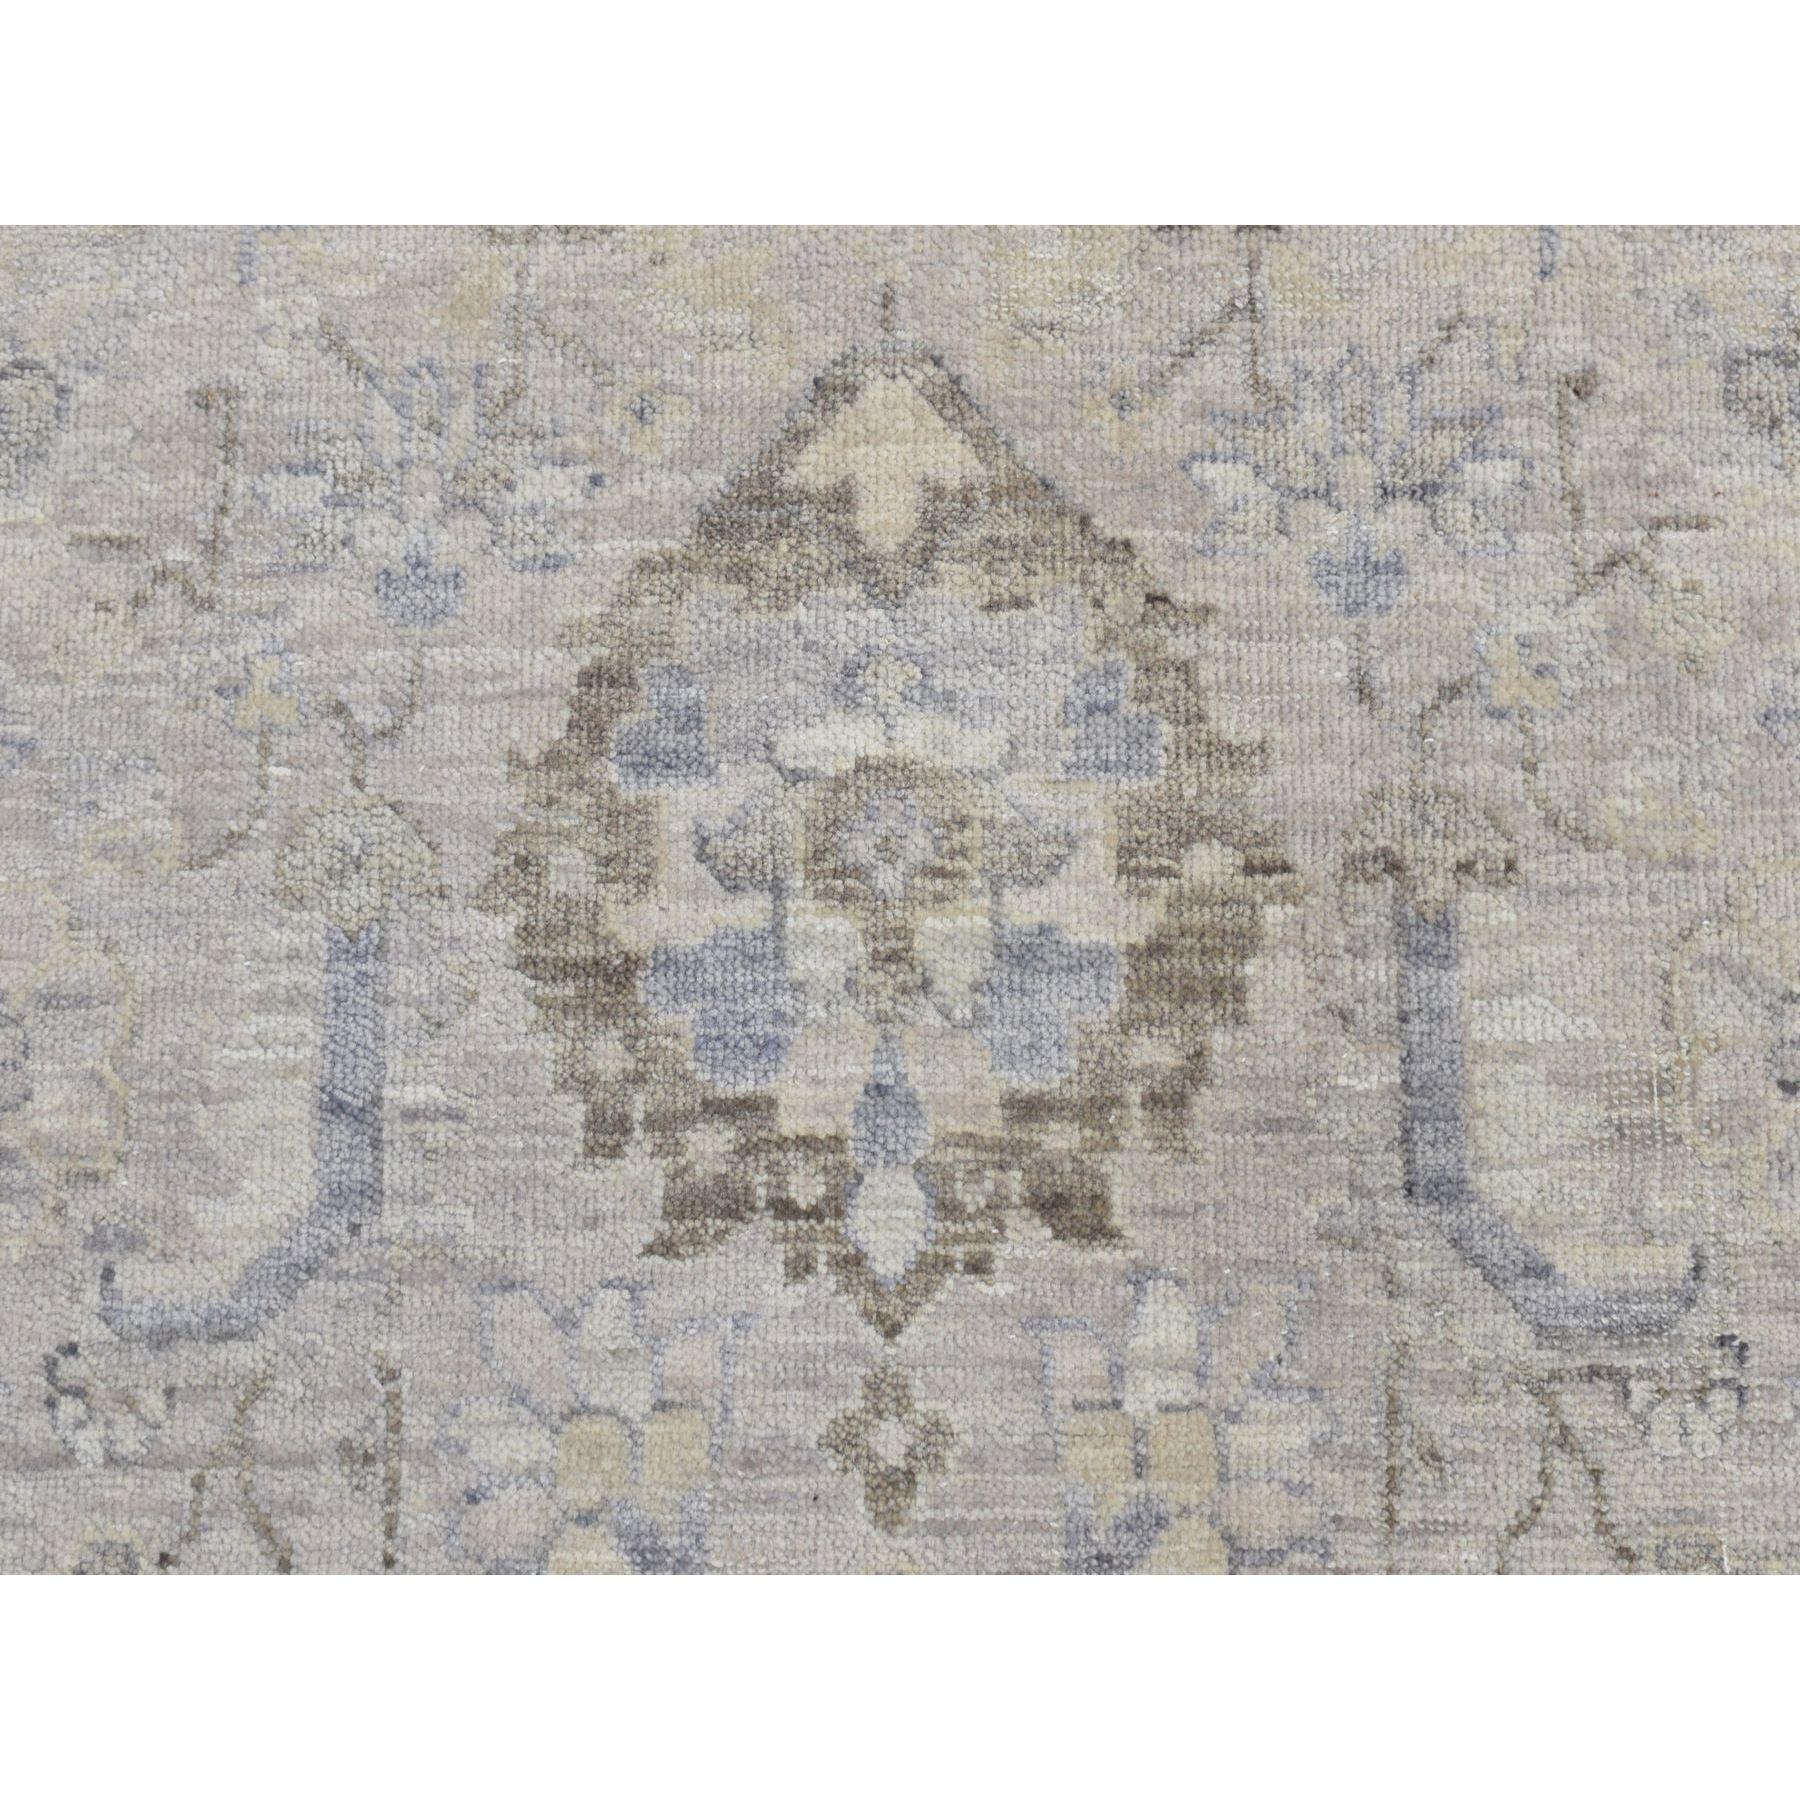 Mid-20th Century Chateau Gray Hand Knotted Wool Rustic Persian Sultanabad Influence Rug 9'1